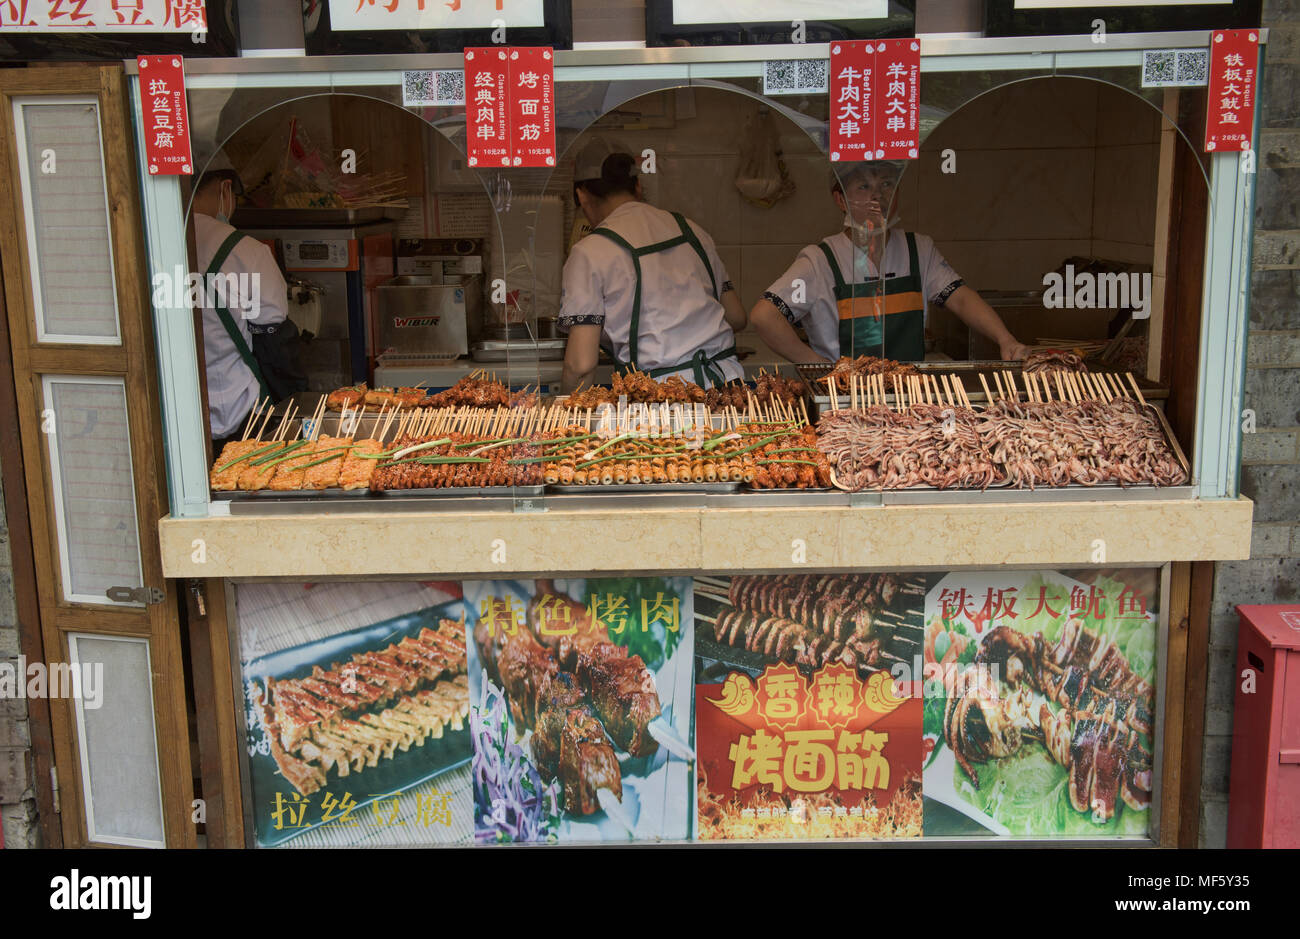 Skewers for sale on Jinli Ancient Street, Chengdu, China Stock Photo